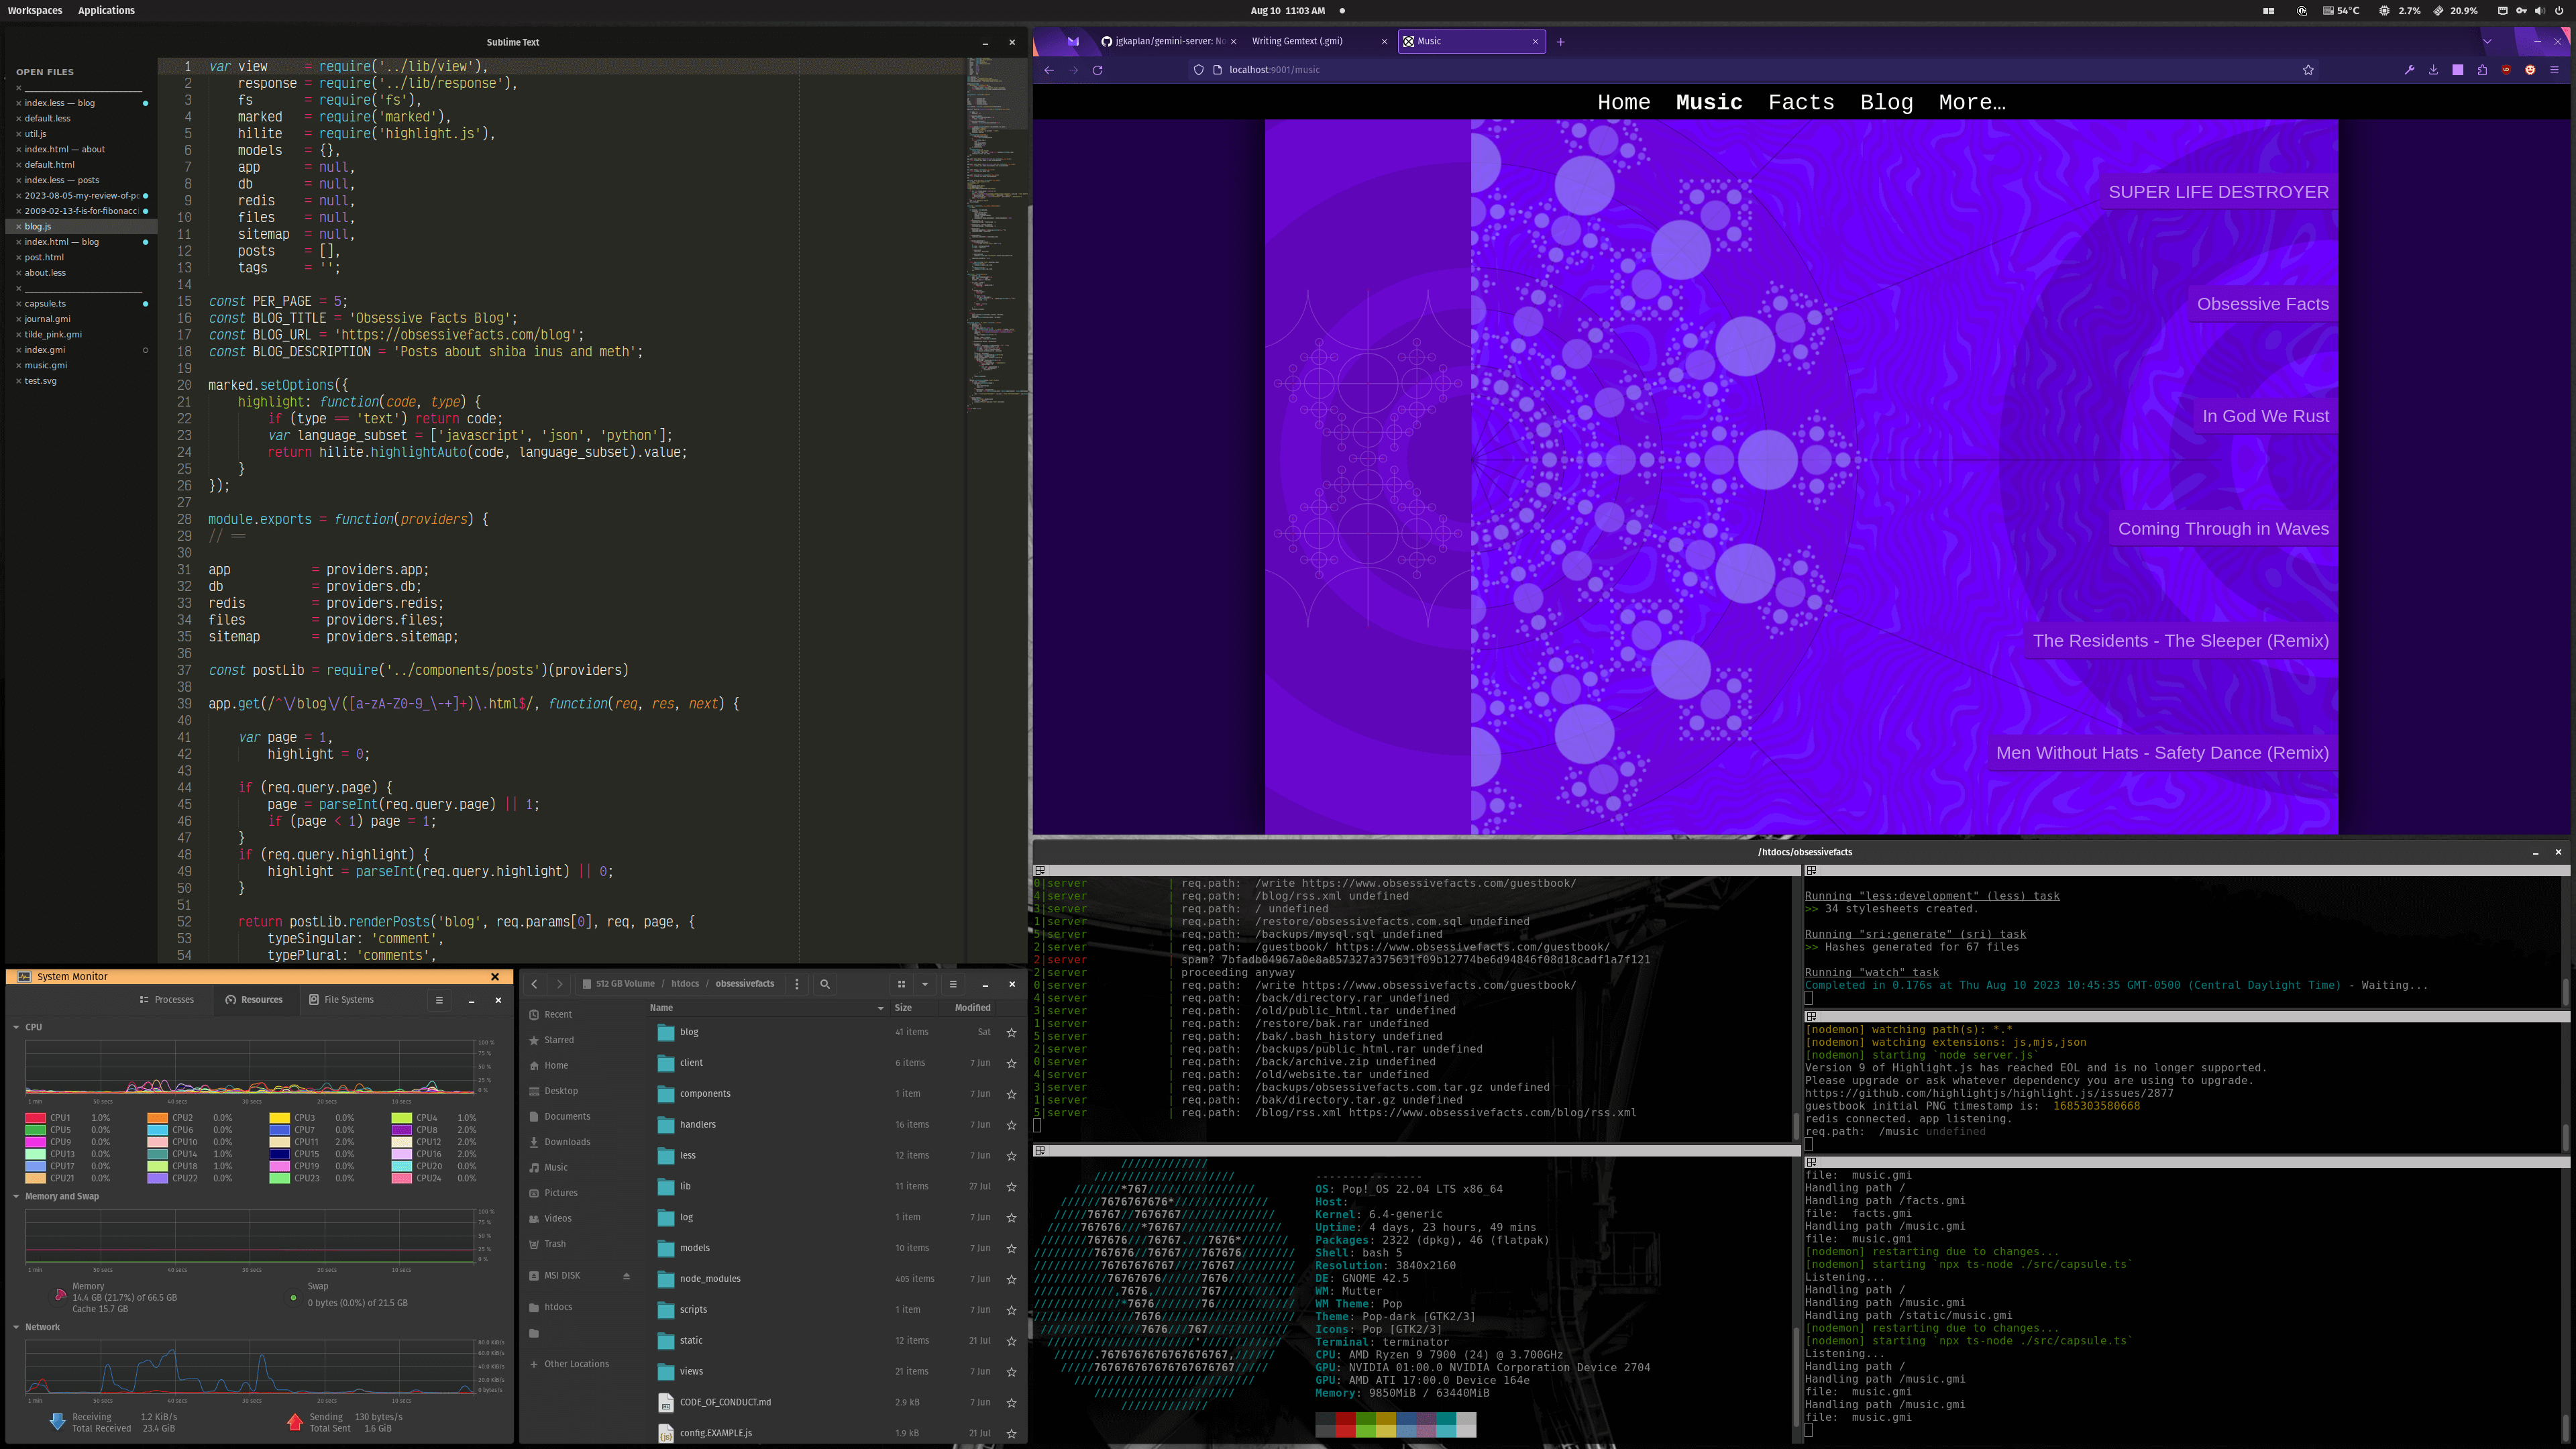 Pop!\_OS Tiling Window Manager